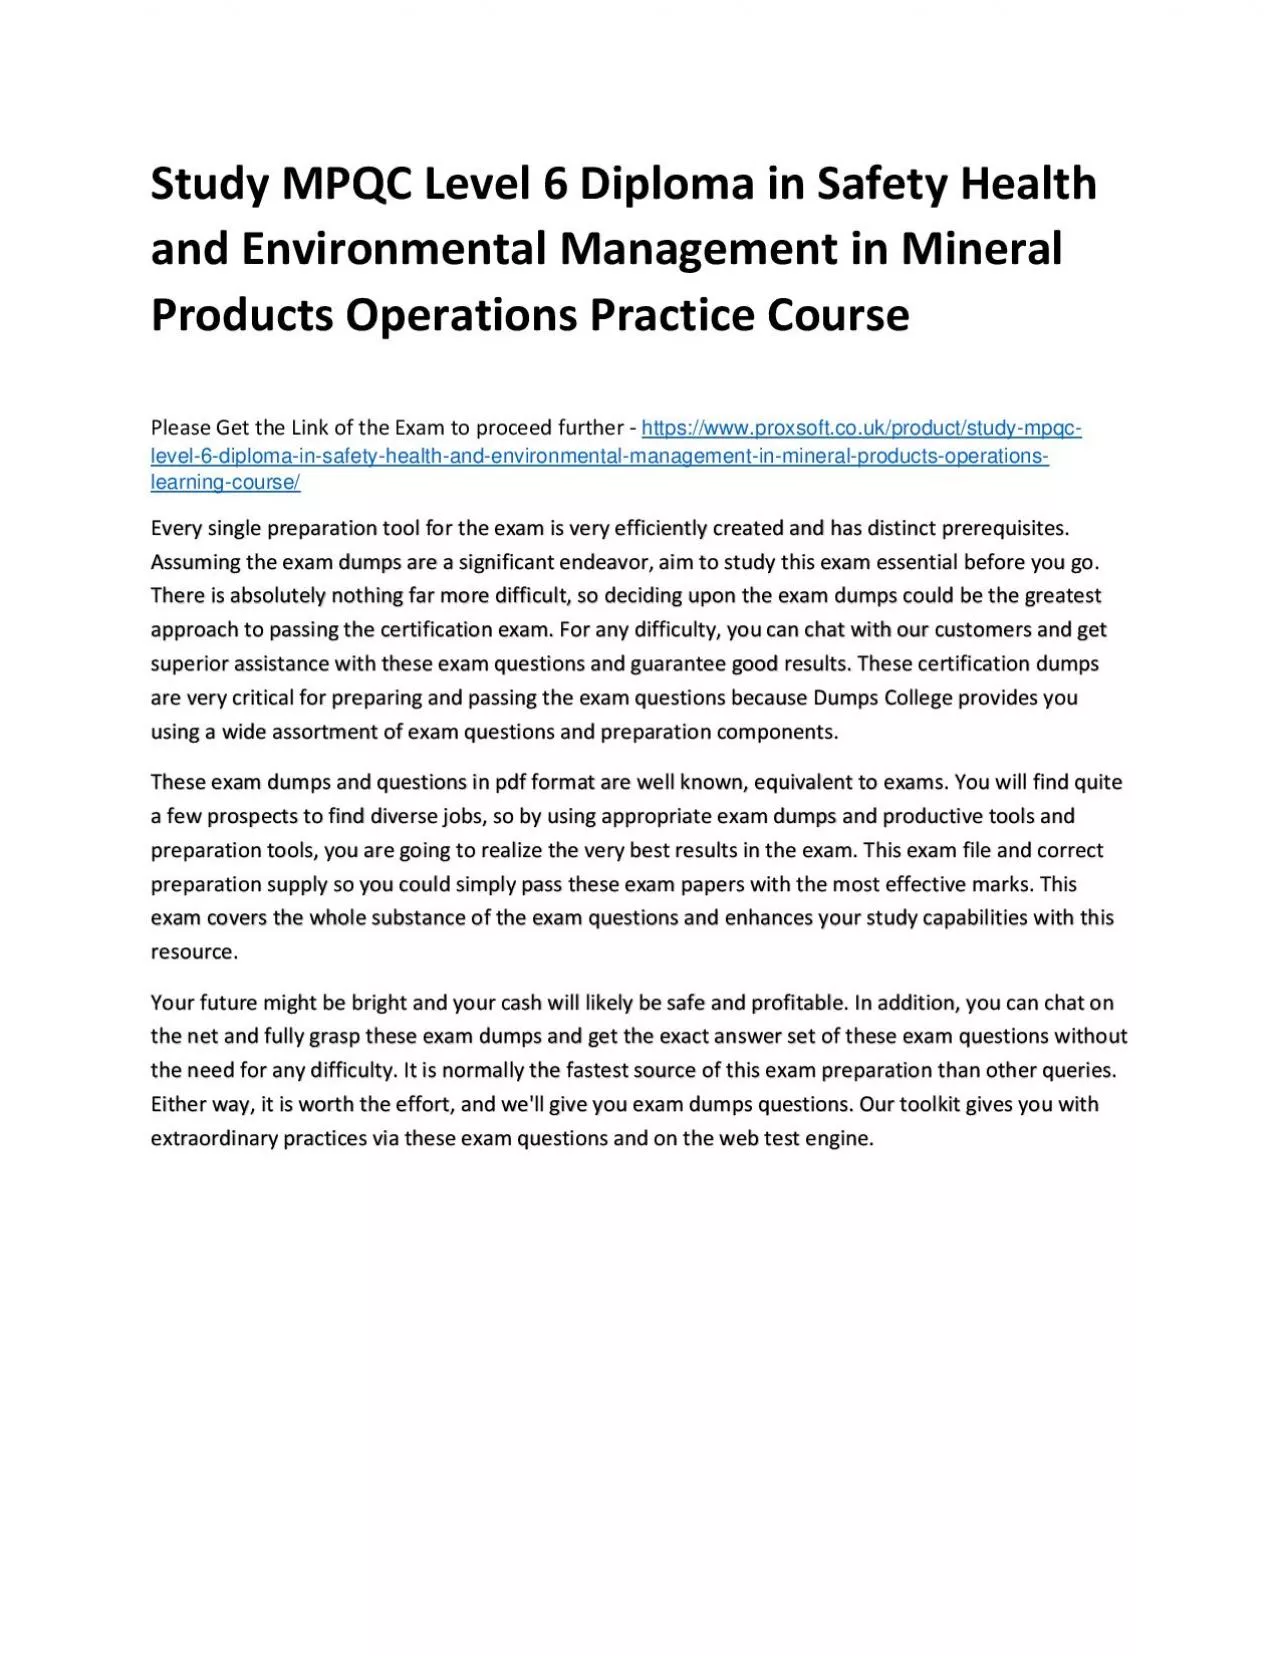 Study MPQC Level 6 Diploma in Safety Health and Environmental Management in Mineral Products